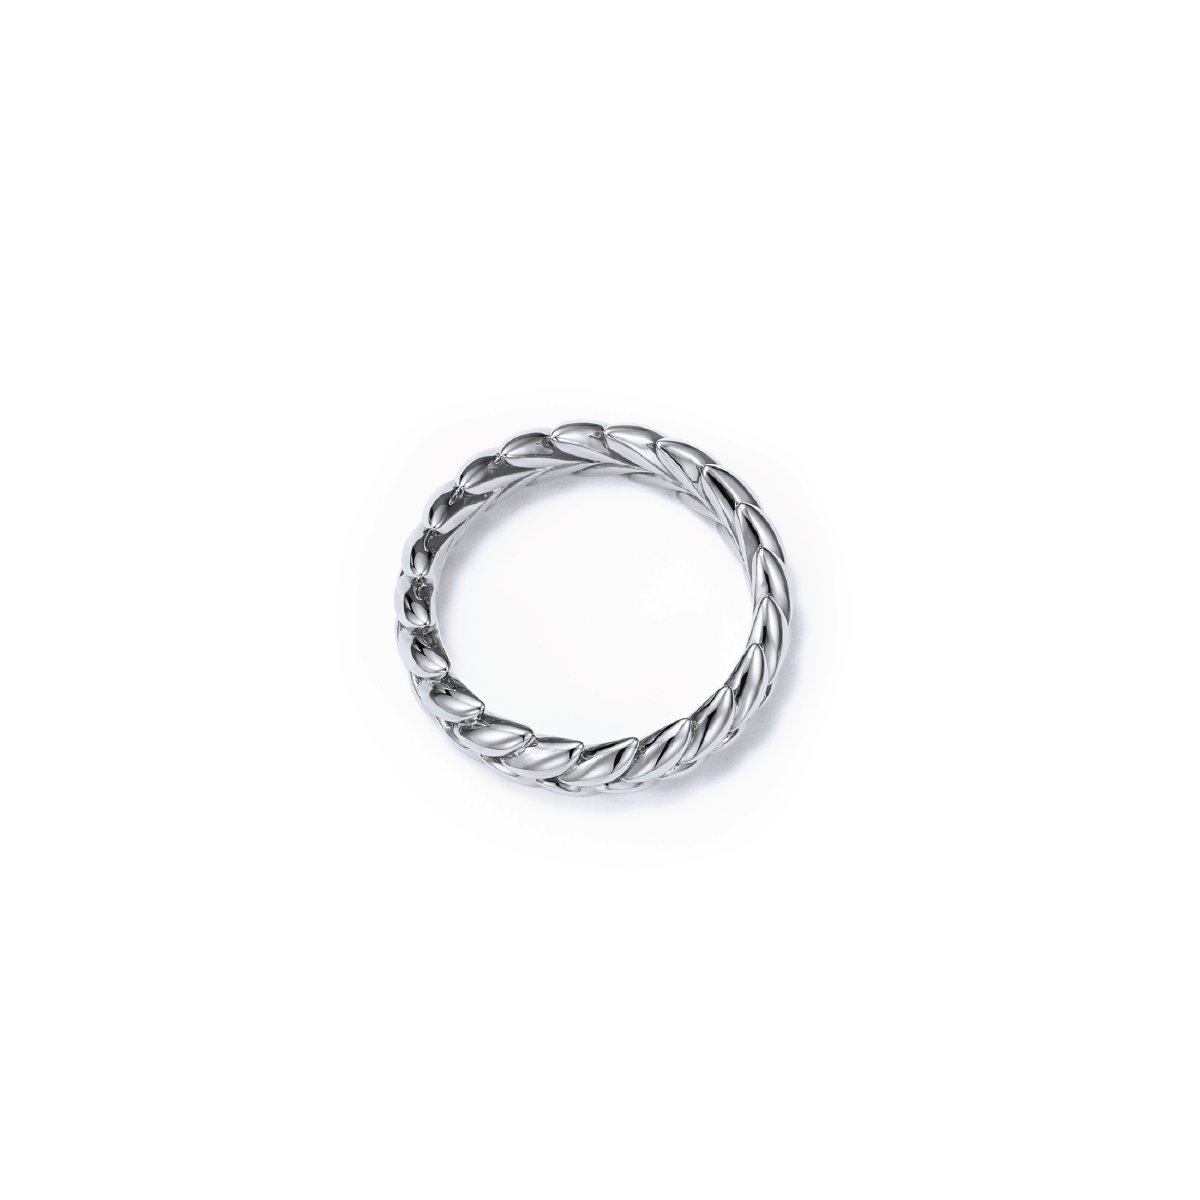 Sustainable White Gold Wedding Ring - Top View